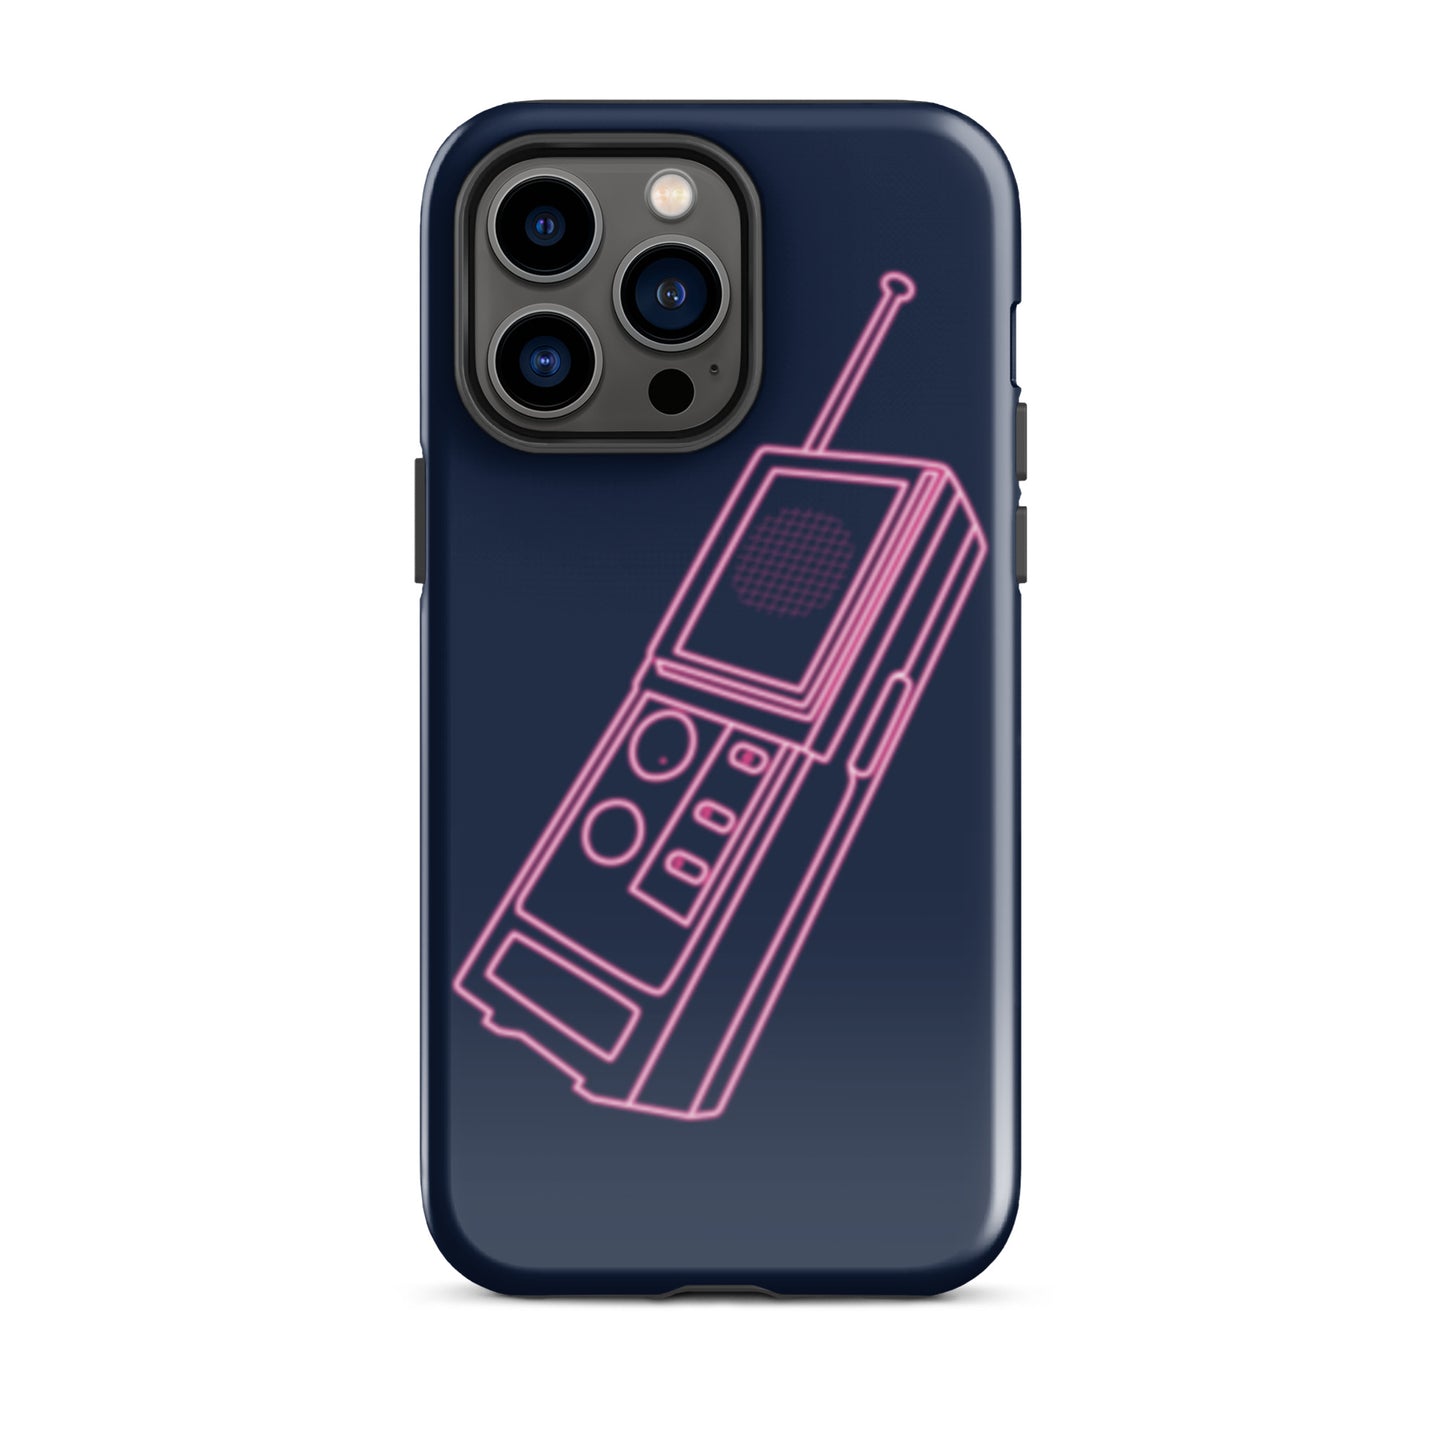 Elevate your iPhone's style with our Navy Blue Tough iPhone Case featuring a Retro WALKIE TALKIE neon graphic design. This sleek case offers durable protection against scratches and drops, keeping your device safe while making a statement. Designed for compatibility with various iPhone models, it's the perfect blend of style and toughness. Upgrade your iPhone's look and safeguard it with our Navy Blue Tough iPhone Case today!